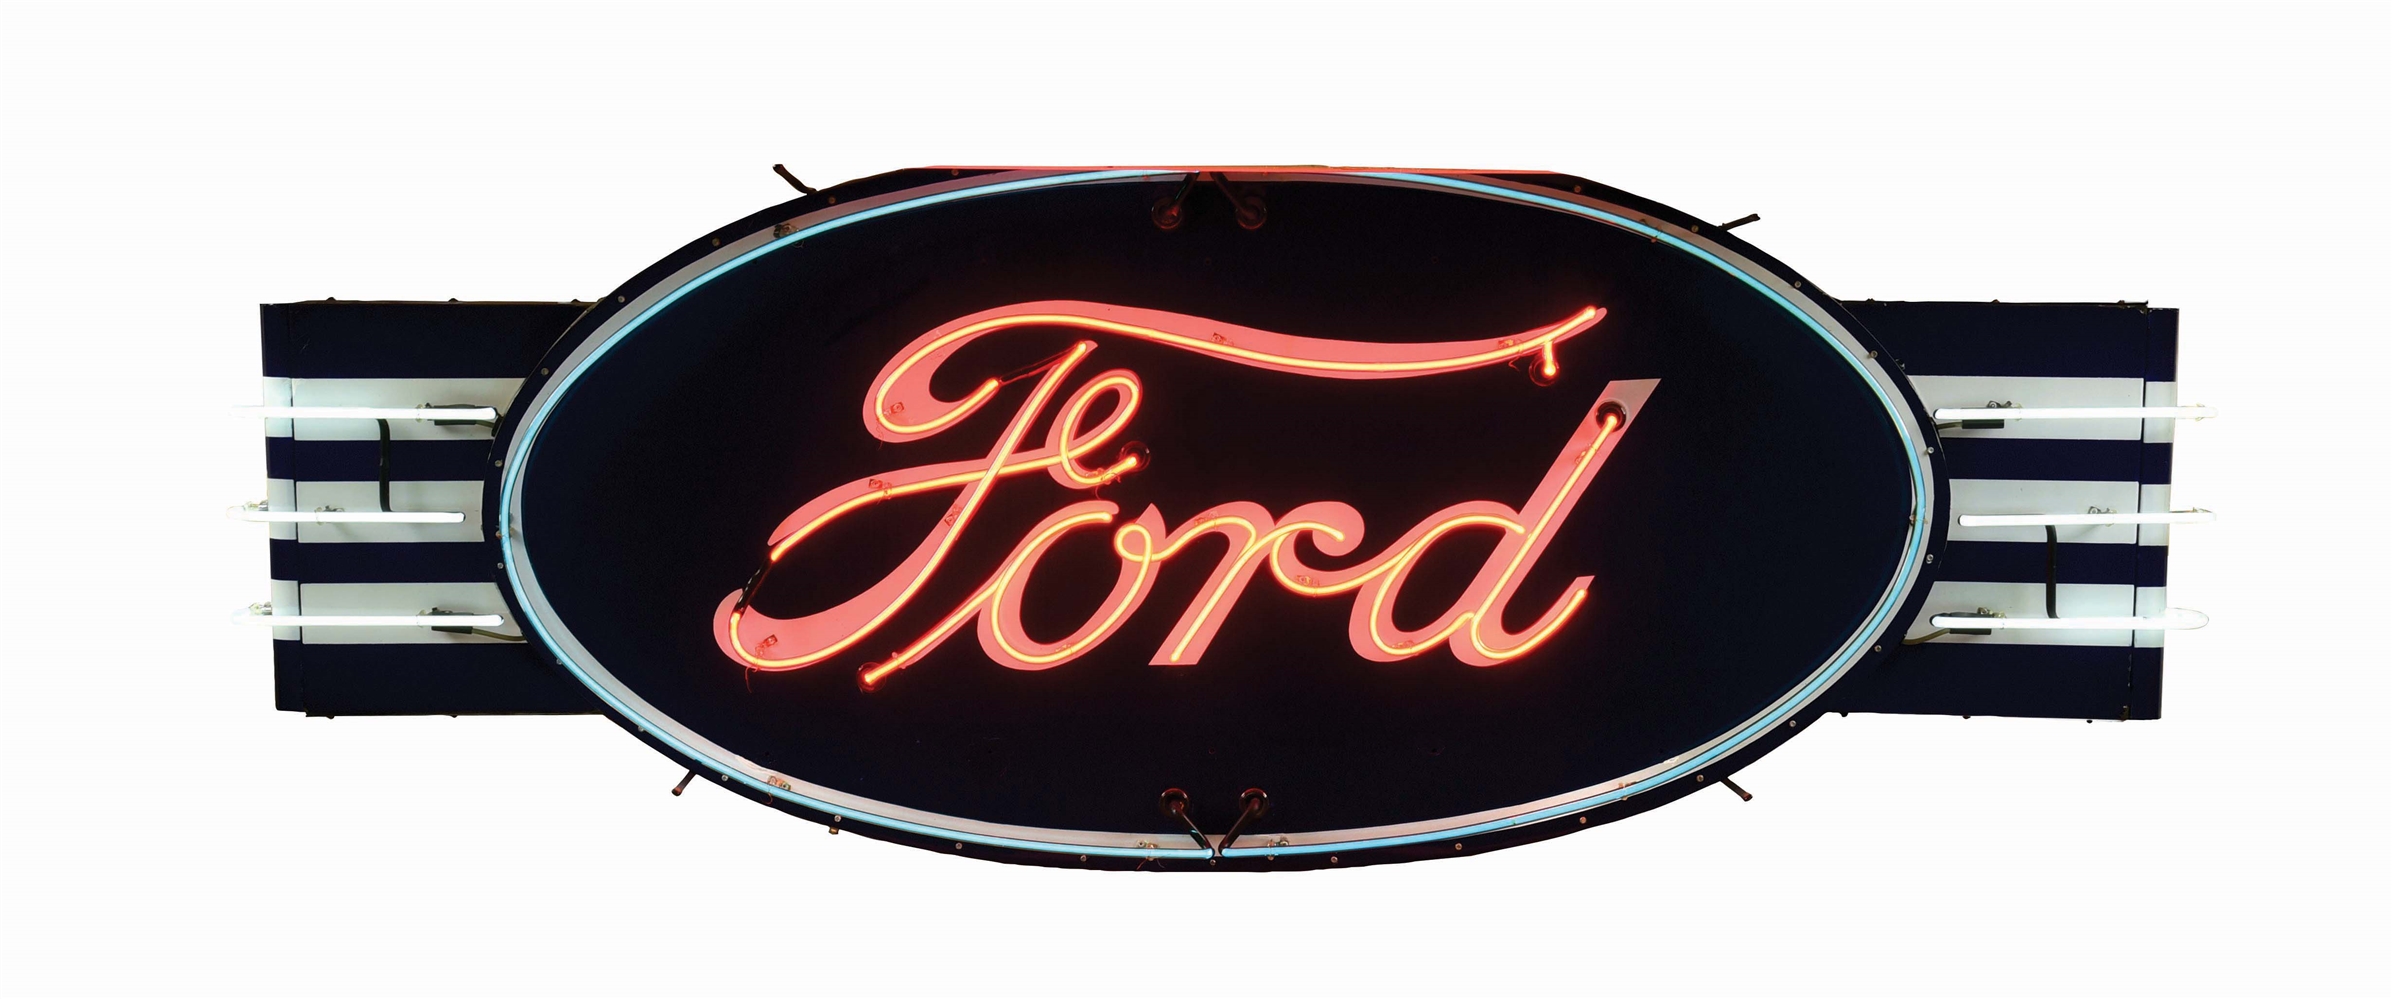 FORD MOTOR CARS PORCELAIN OVAL NEON SIGN W/ PORCELAIN WING ATTACHMENTS.